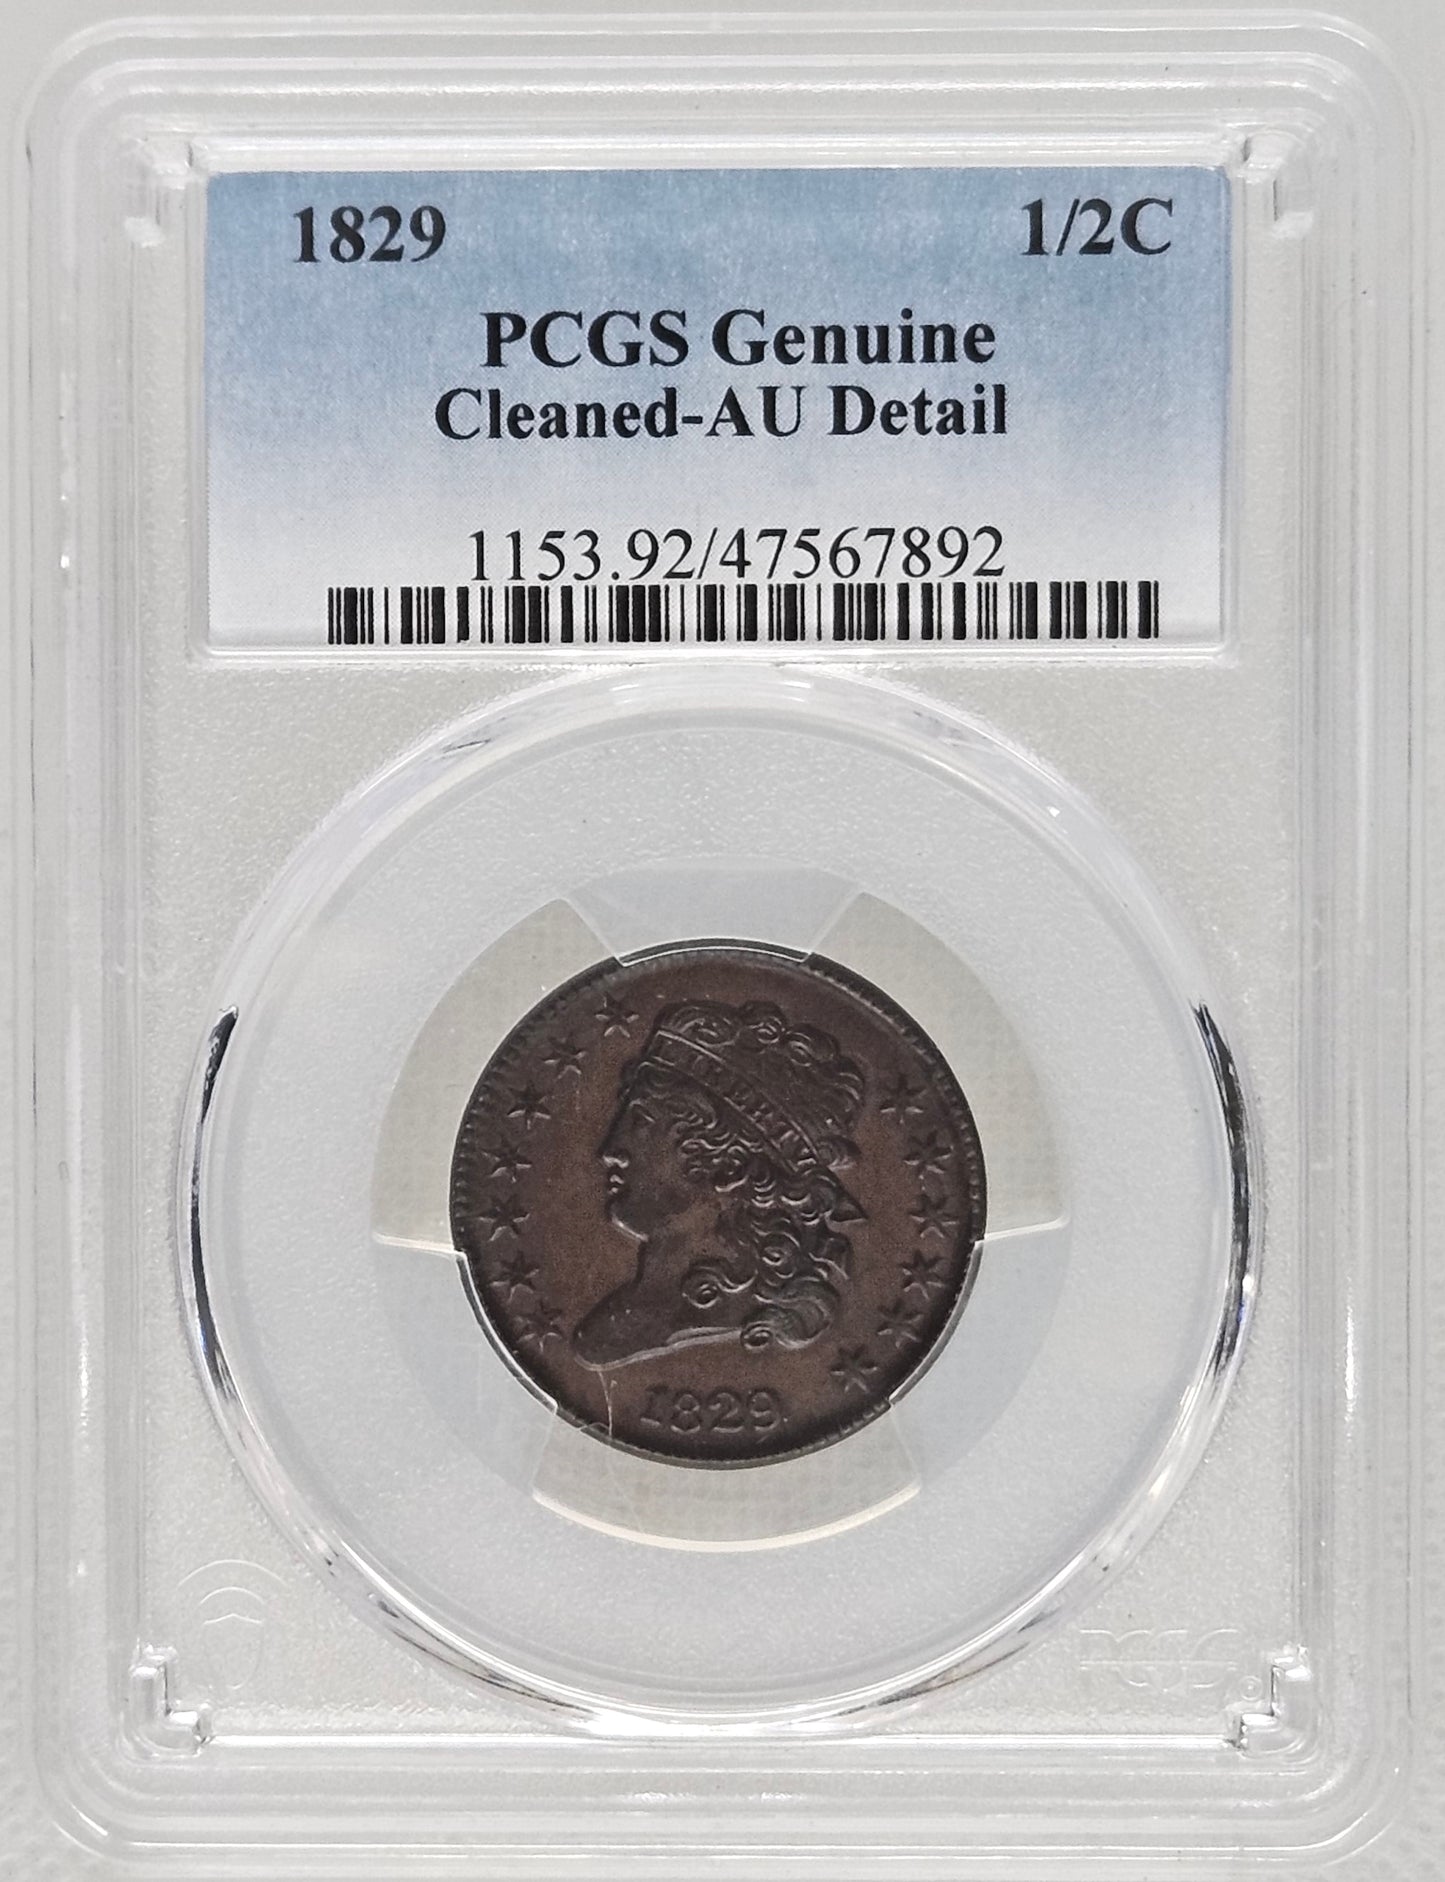 1829-P Classic Head Half Cent PCGS AU Detail Cleaned Awesome Graded Type Coin!!!